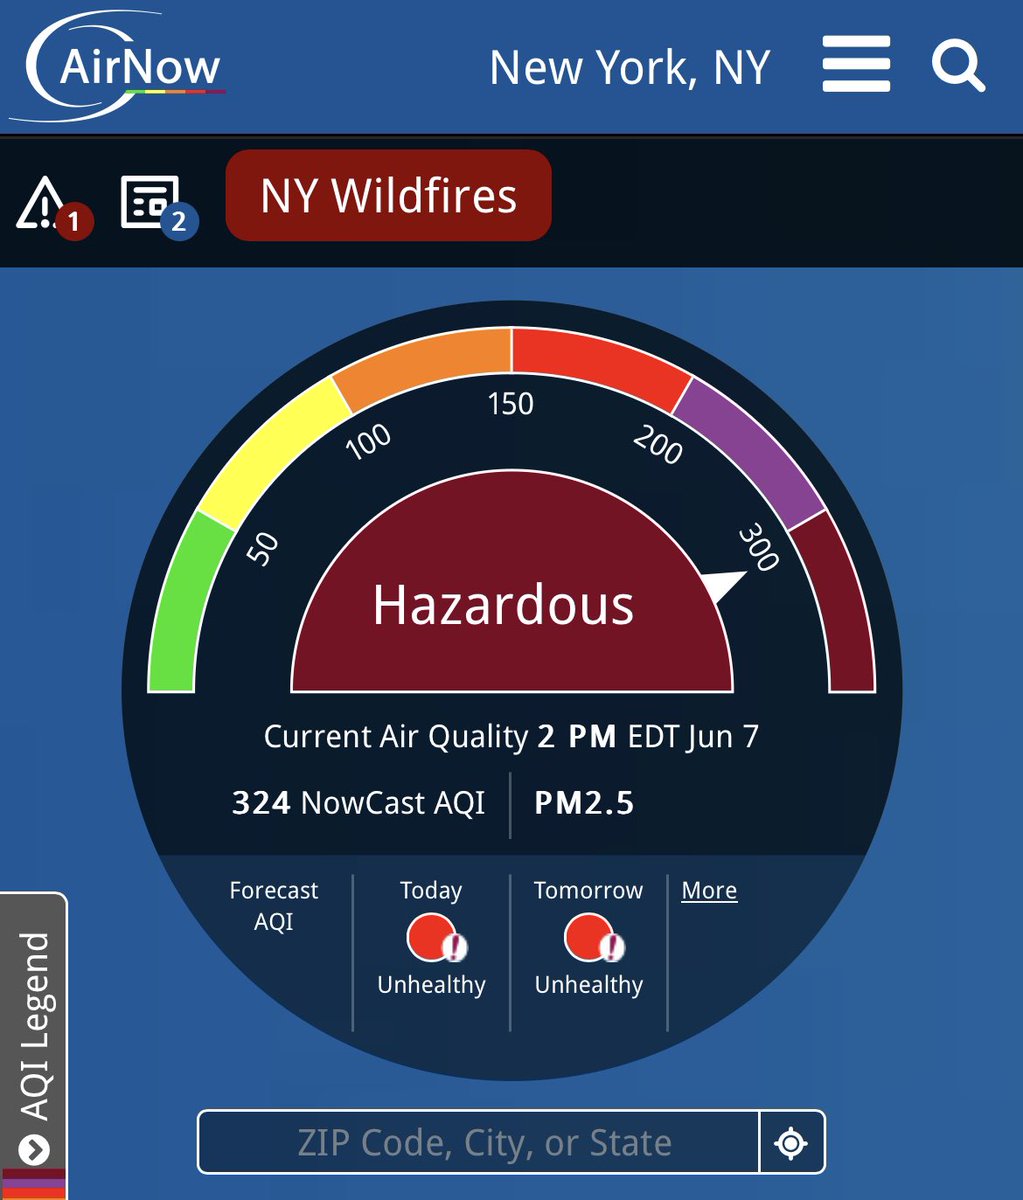 Air Quality Index in NYC is now up to 324. We are at the highest level of health risk, considered “hazardous”. ** NYC Health Dept advises that NYers stay indoors if possible, and use a high-quality mask if you need to be outside **